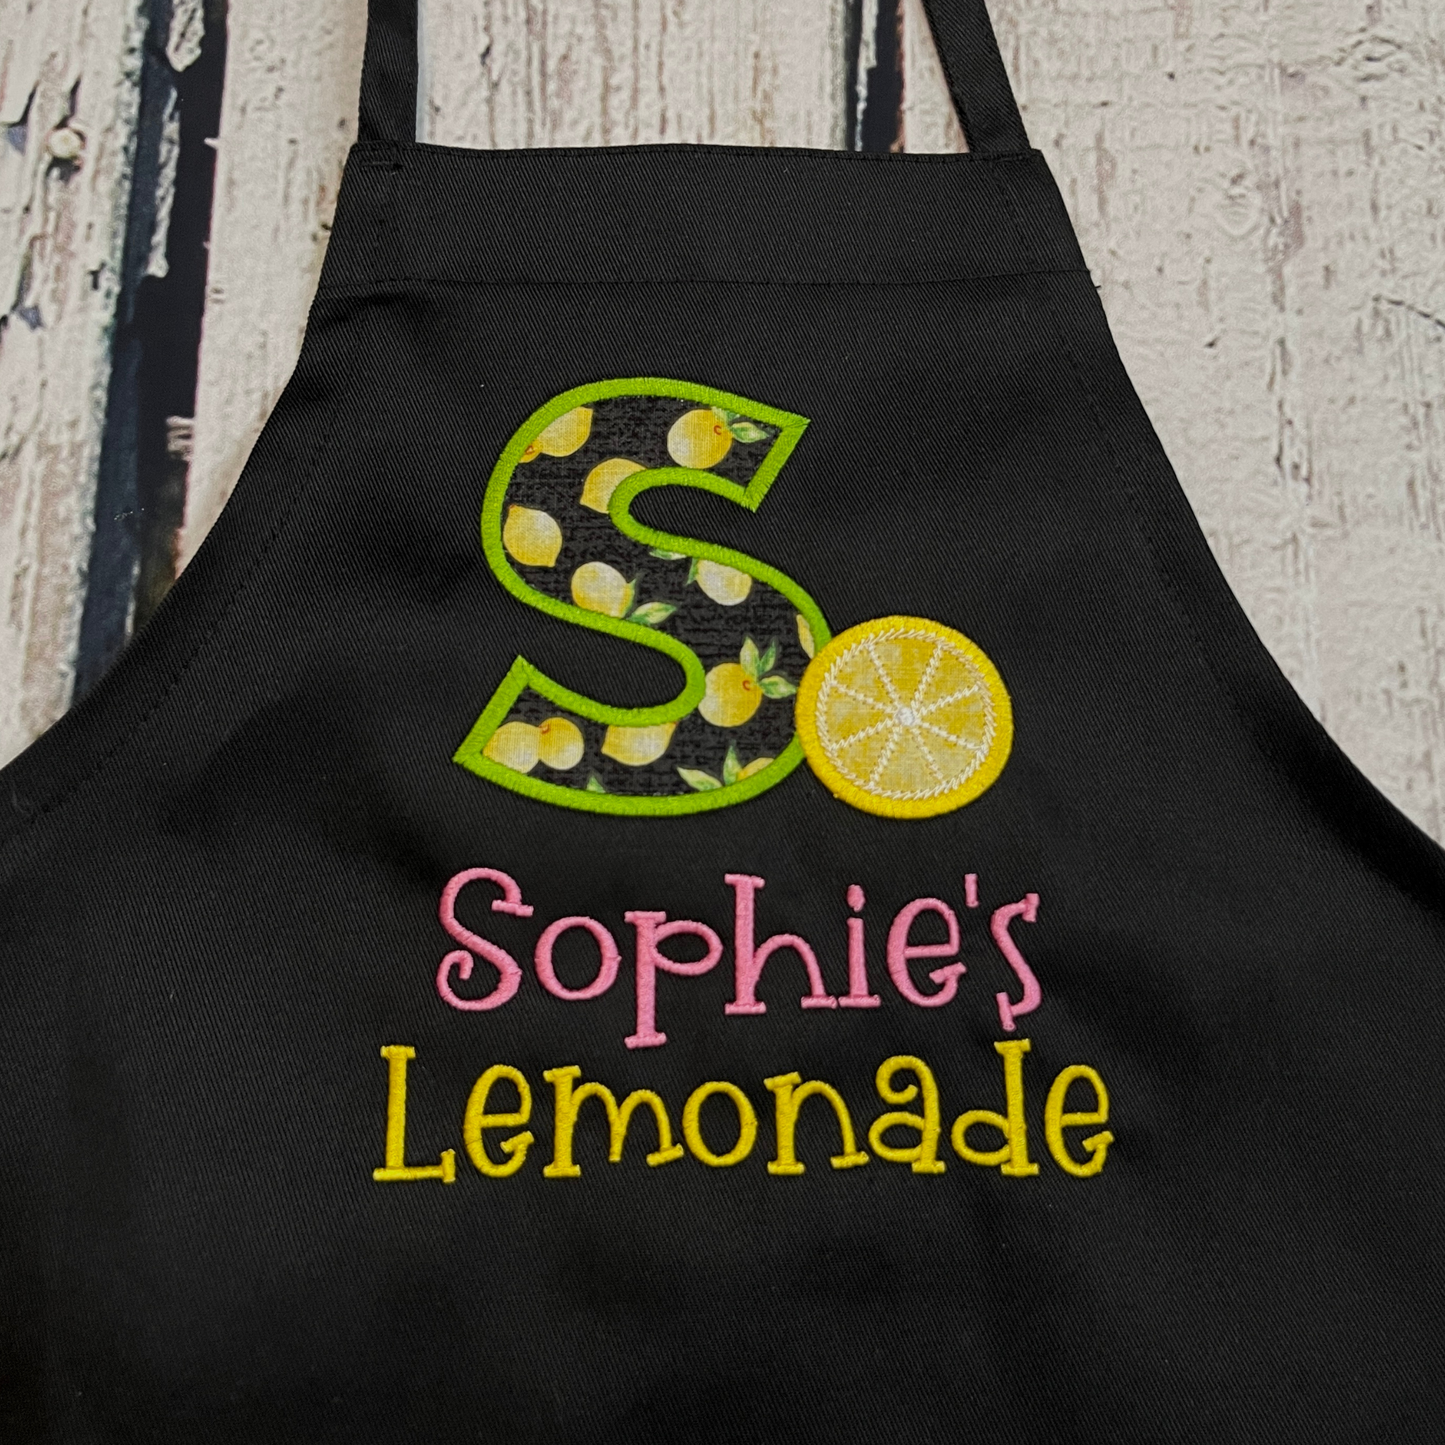 Personalized Lemonade Stand Apron for kids age 6-10